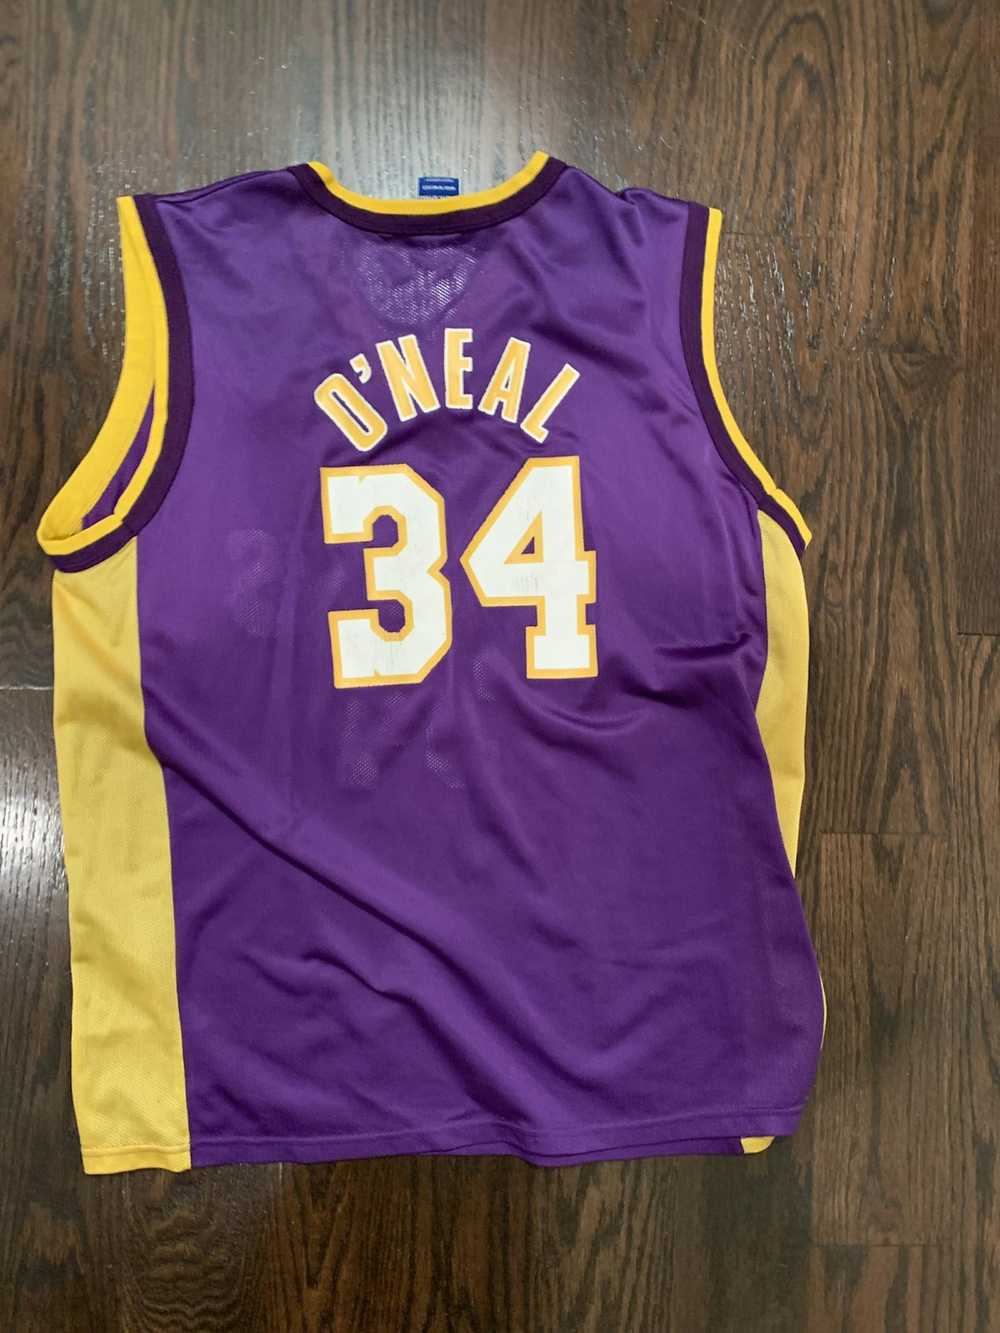 NBA Shaquille O’Neal Lakers Jersey - image 2